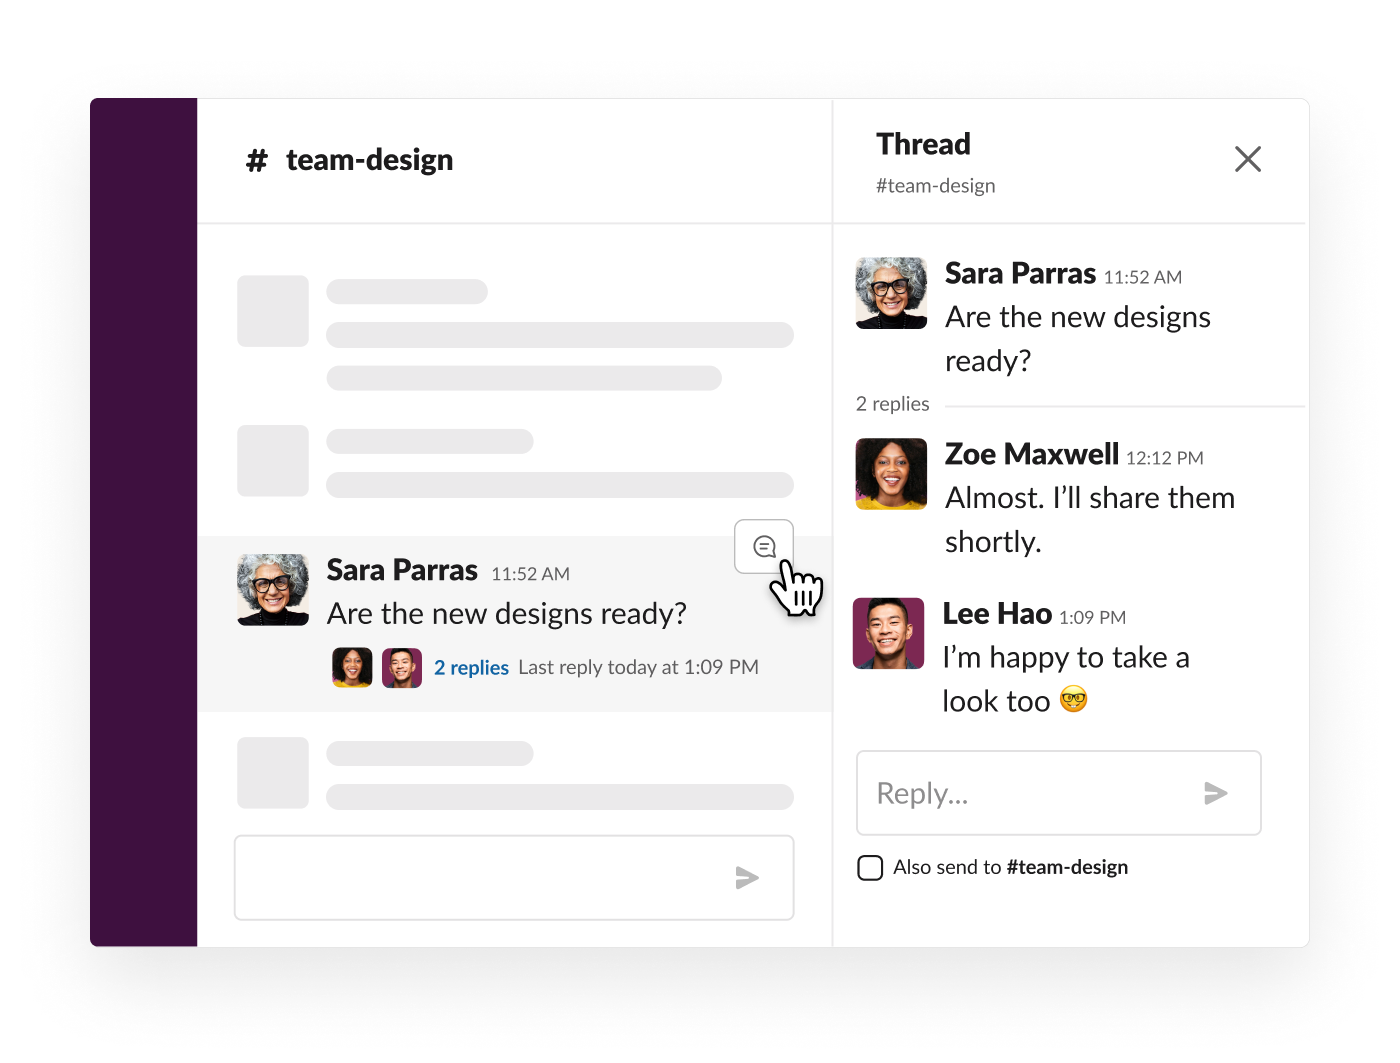 A thread to keep discussion organised in Slack